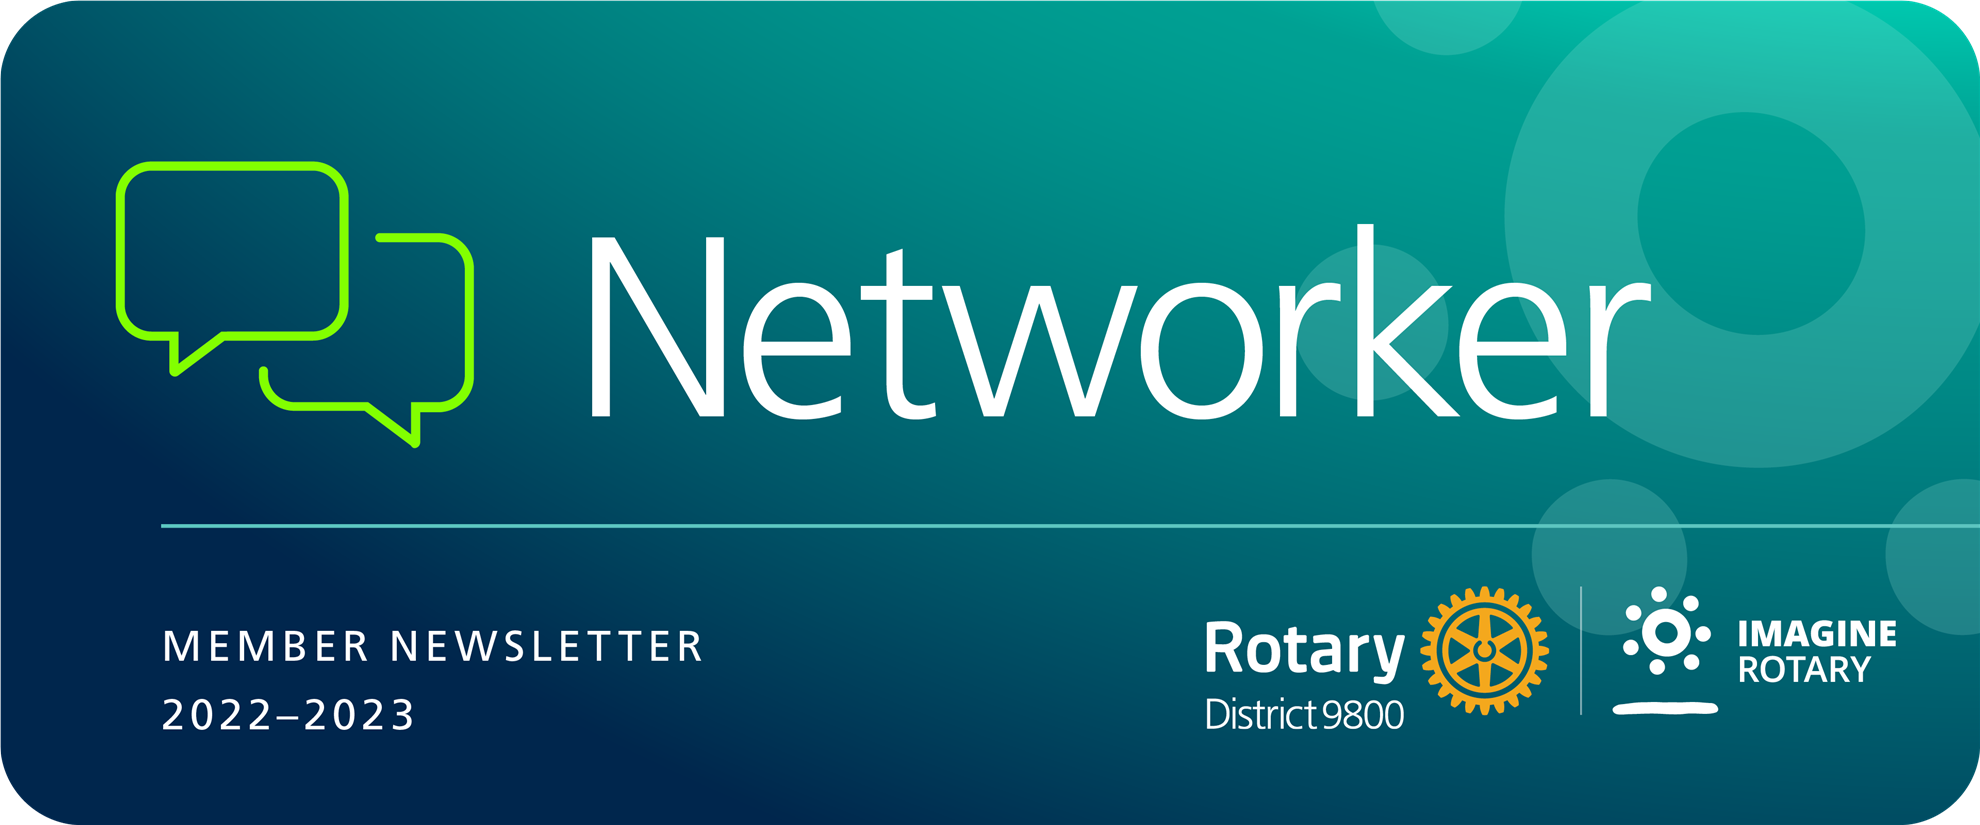 Rotary District 9800